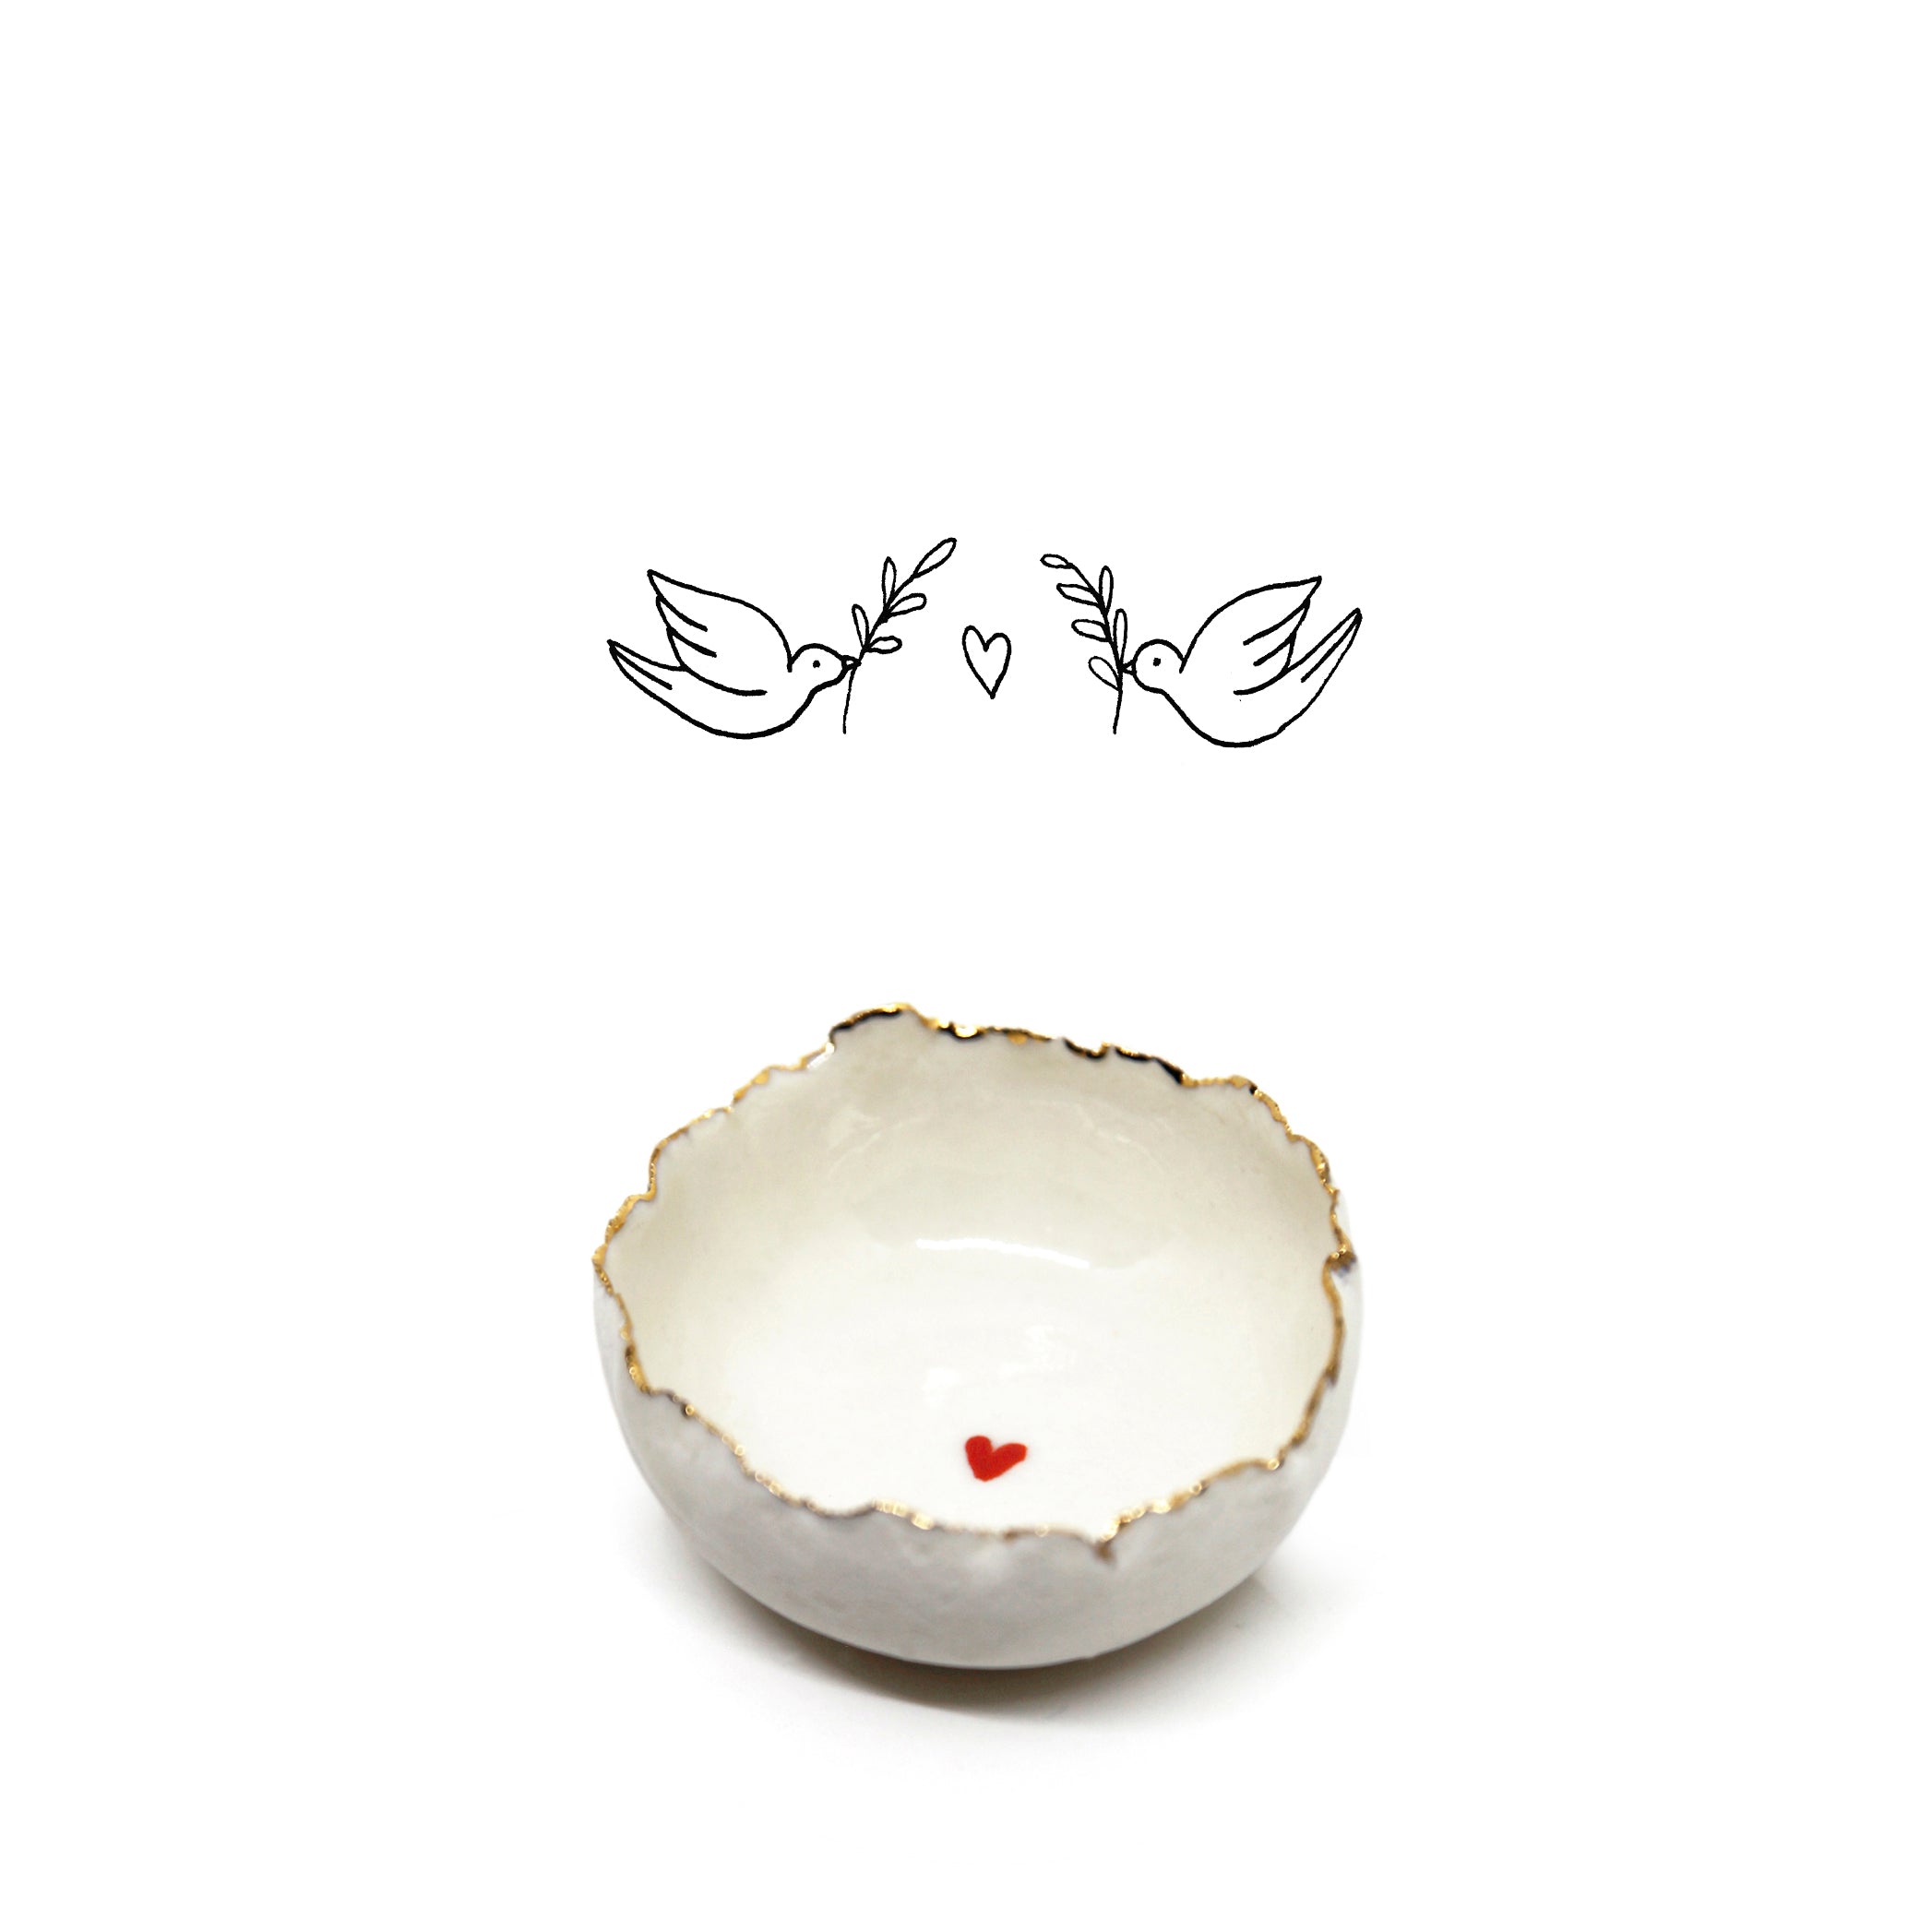 HB Jagged Bowl with Heart, 7cm